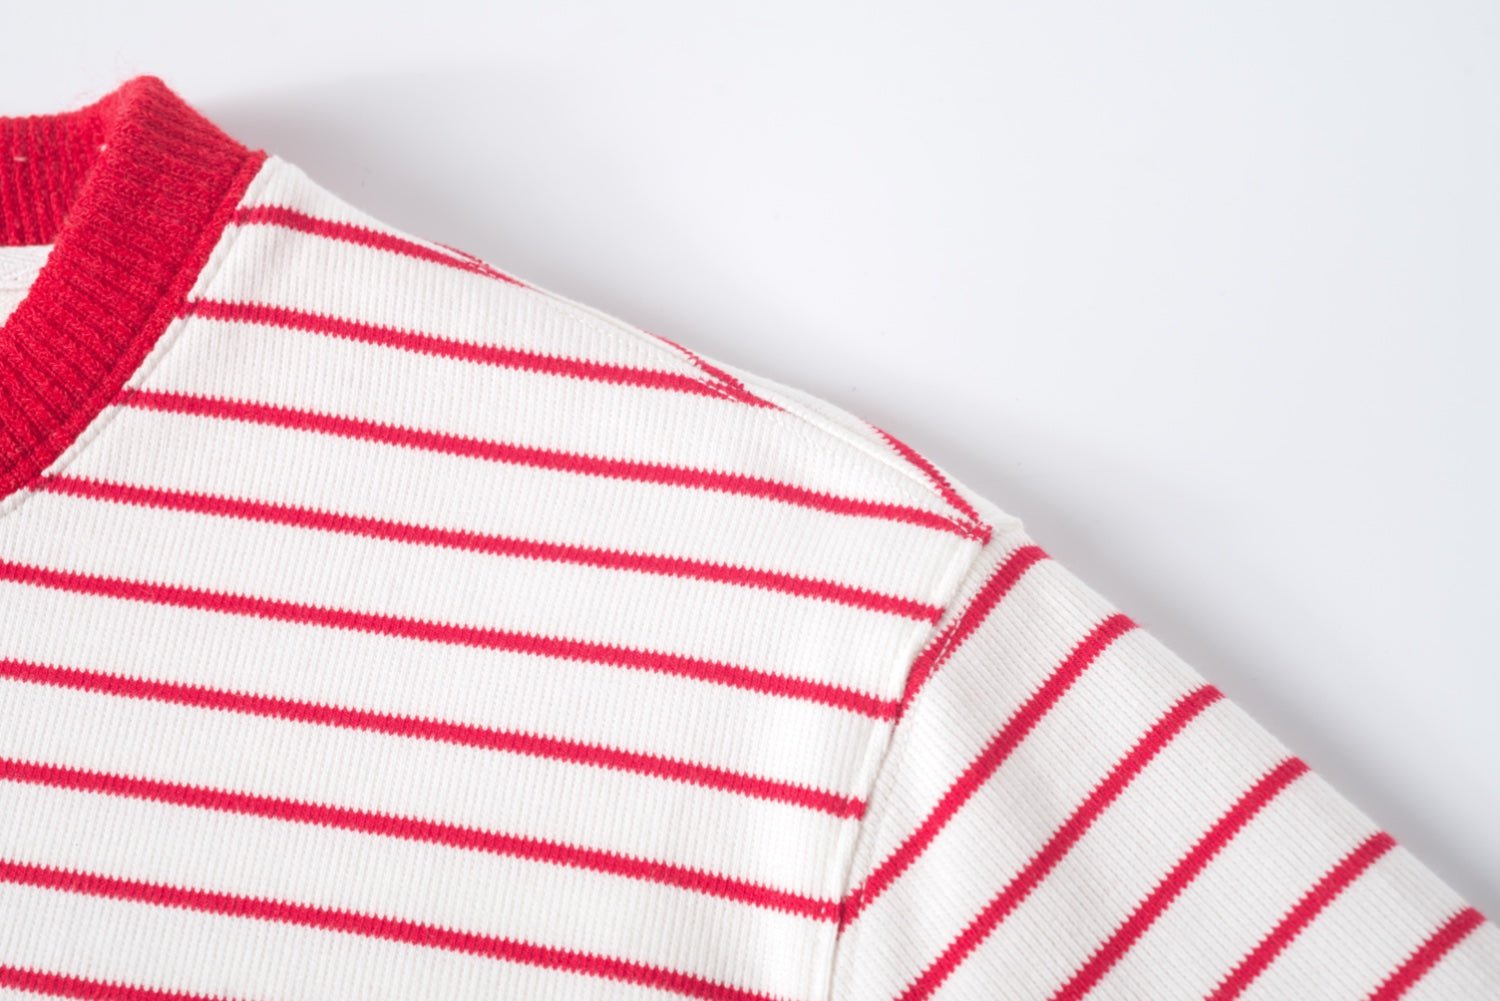 Alexia Sandra Red Stripe Long Sleeve T-shirt With Strawberry Print | MADA IN CHINA